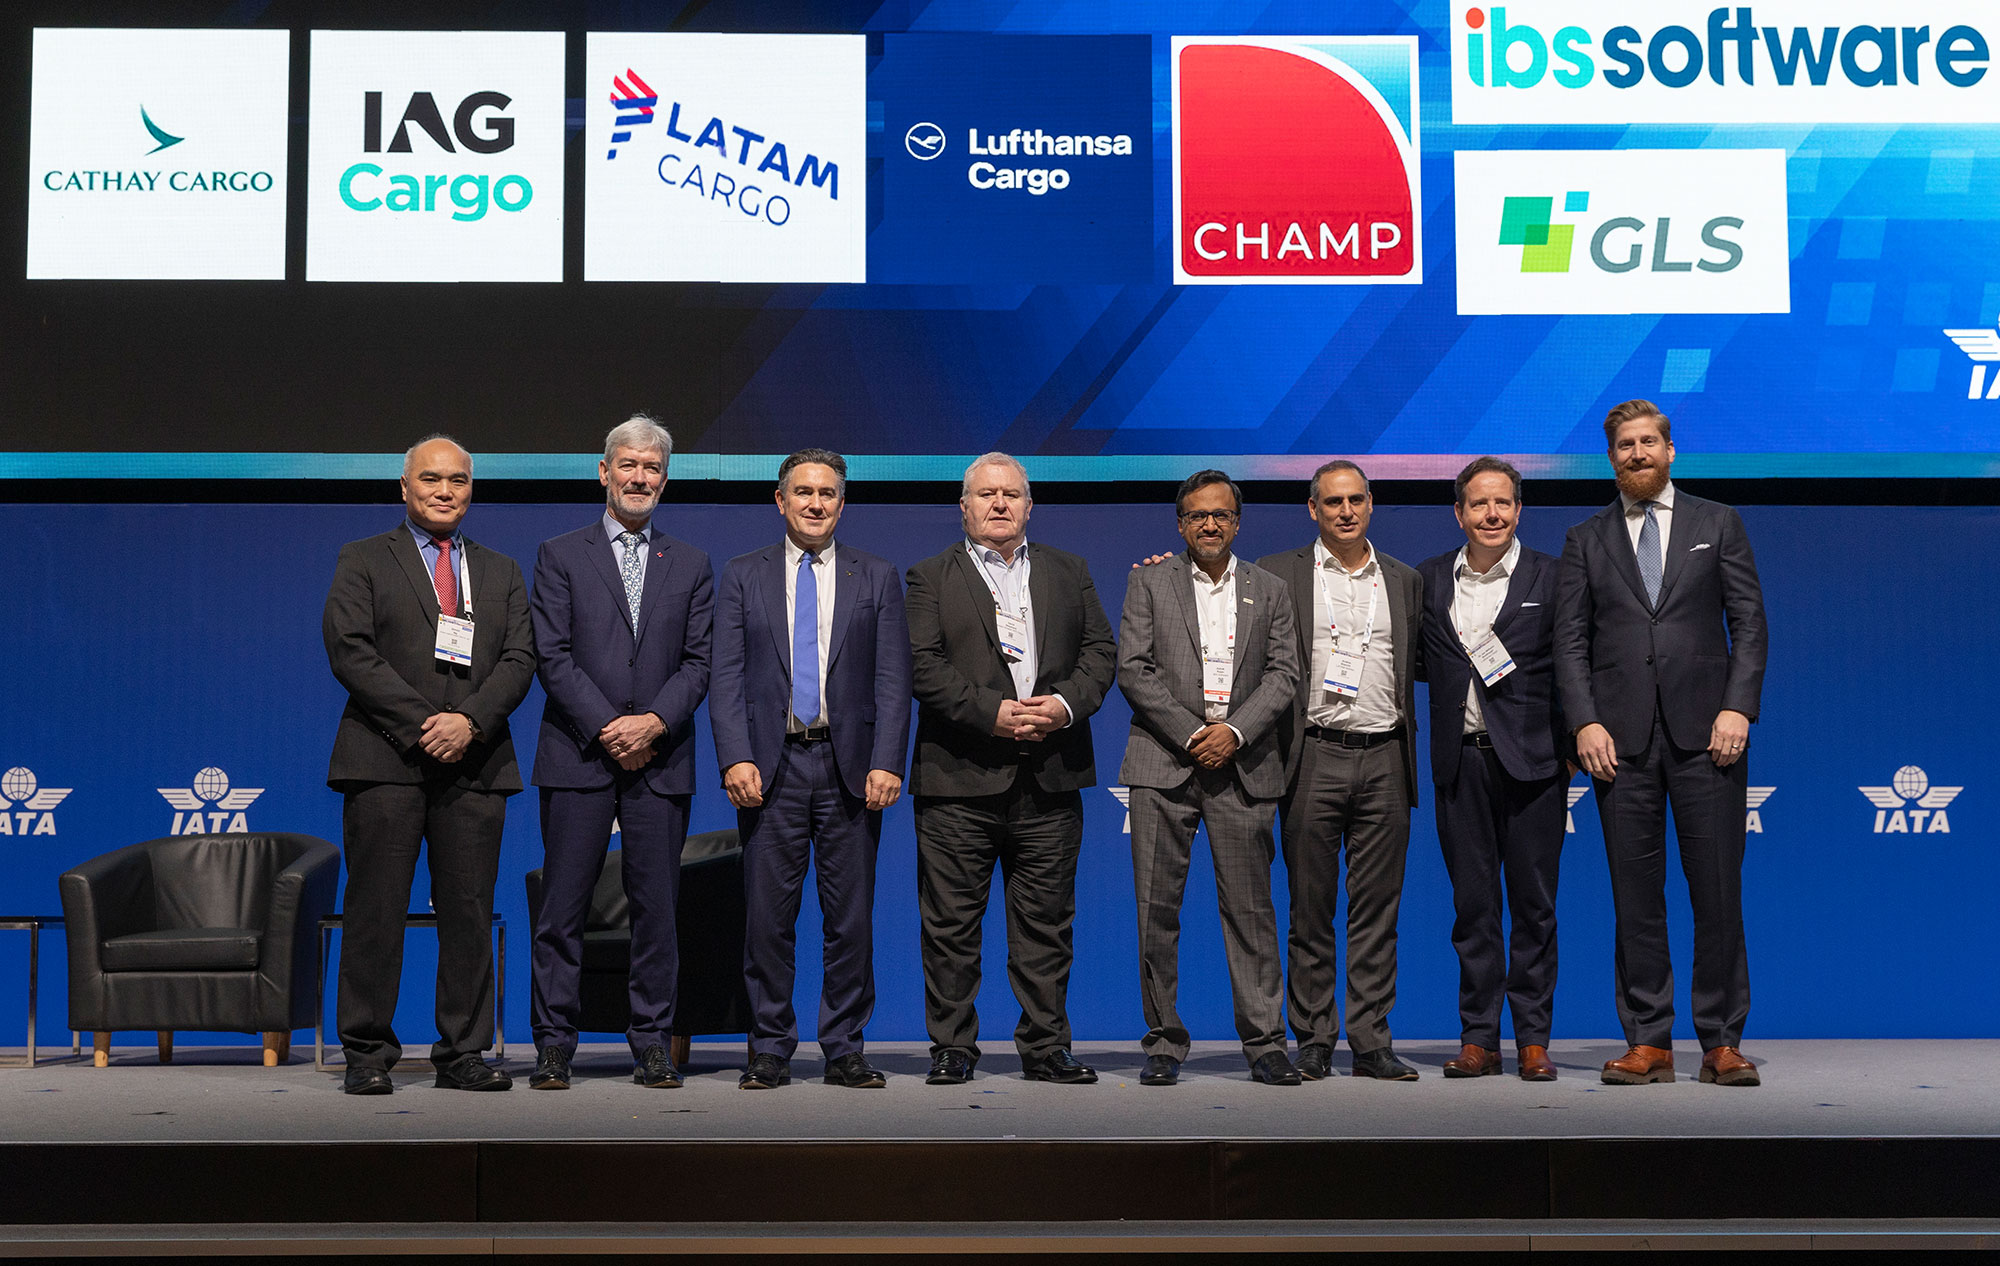 Global Logisitics System HK Co Ltd Chief Executive Simon Ng (left) and Director Cathay Cargo Tom Owen (third from left) on stage at WCS as co-signatories to IATA’s Digitalization Leadership Charter